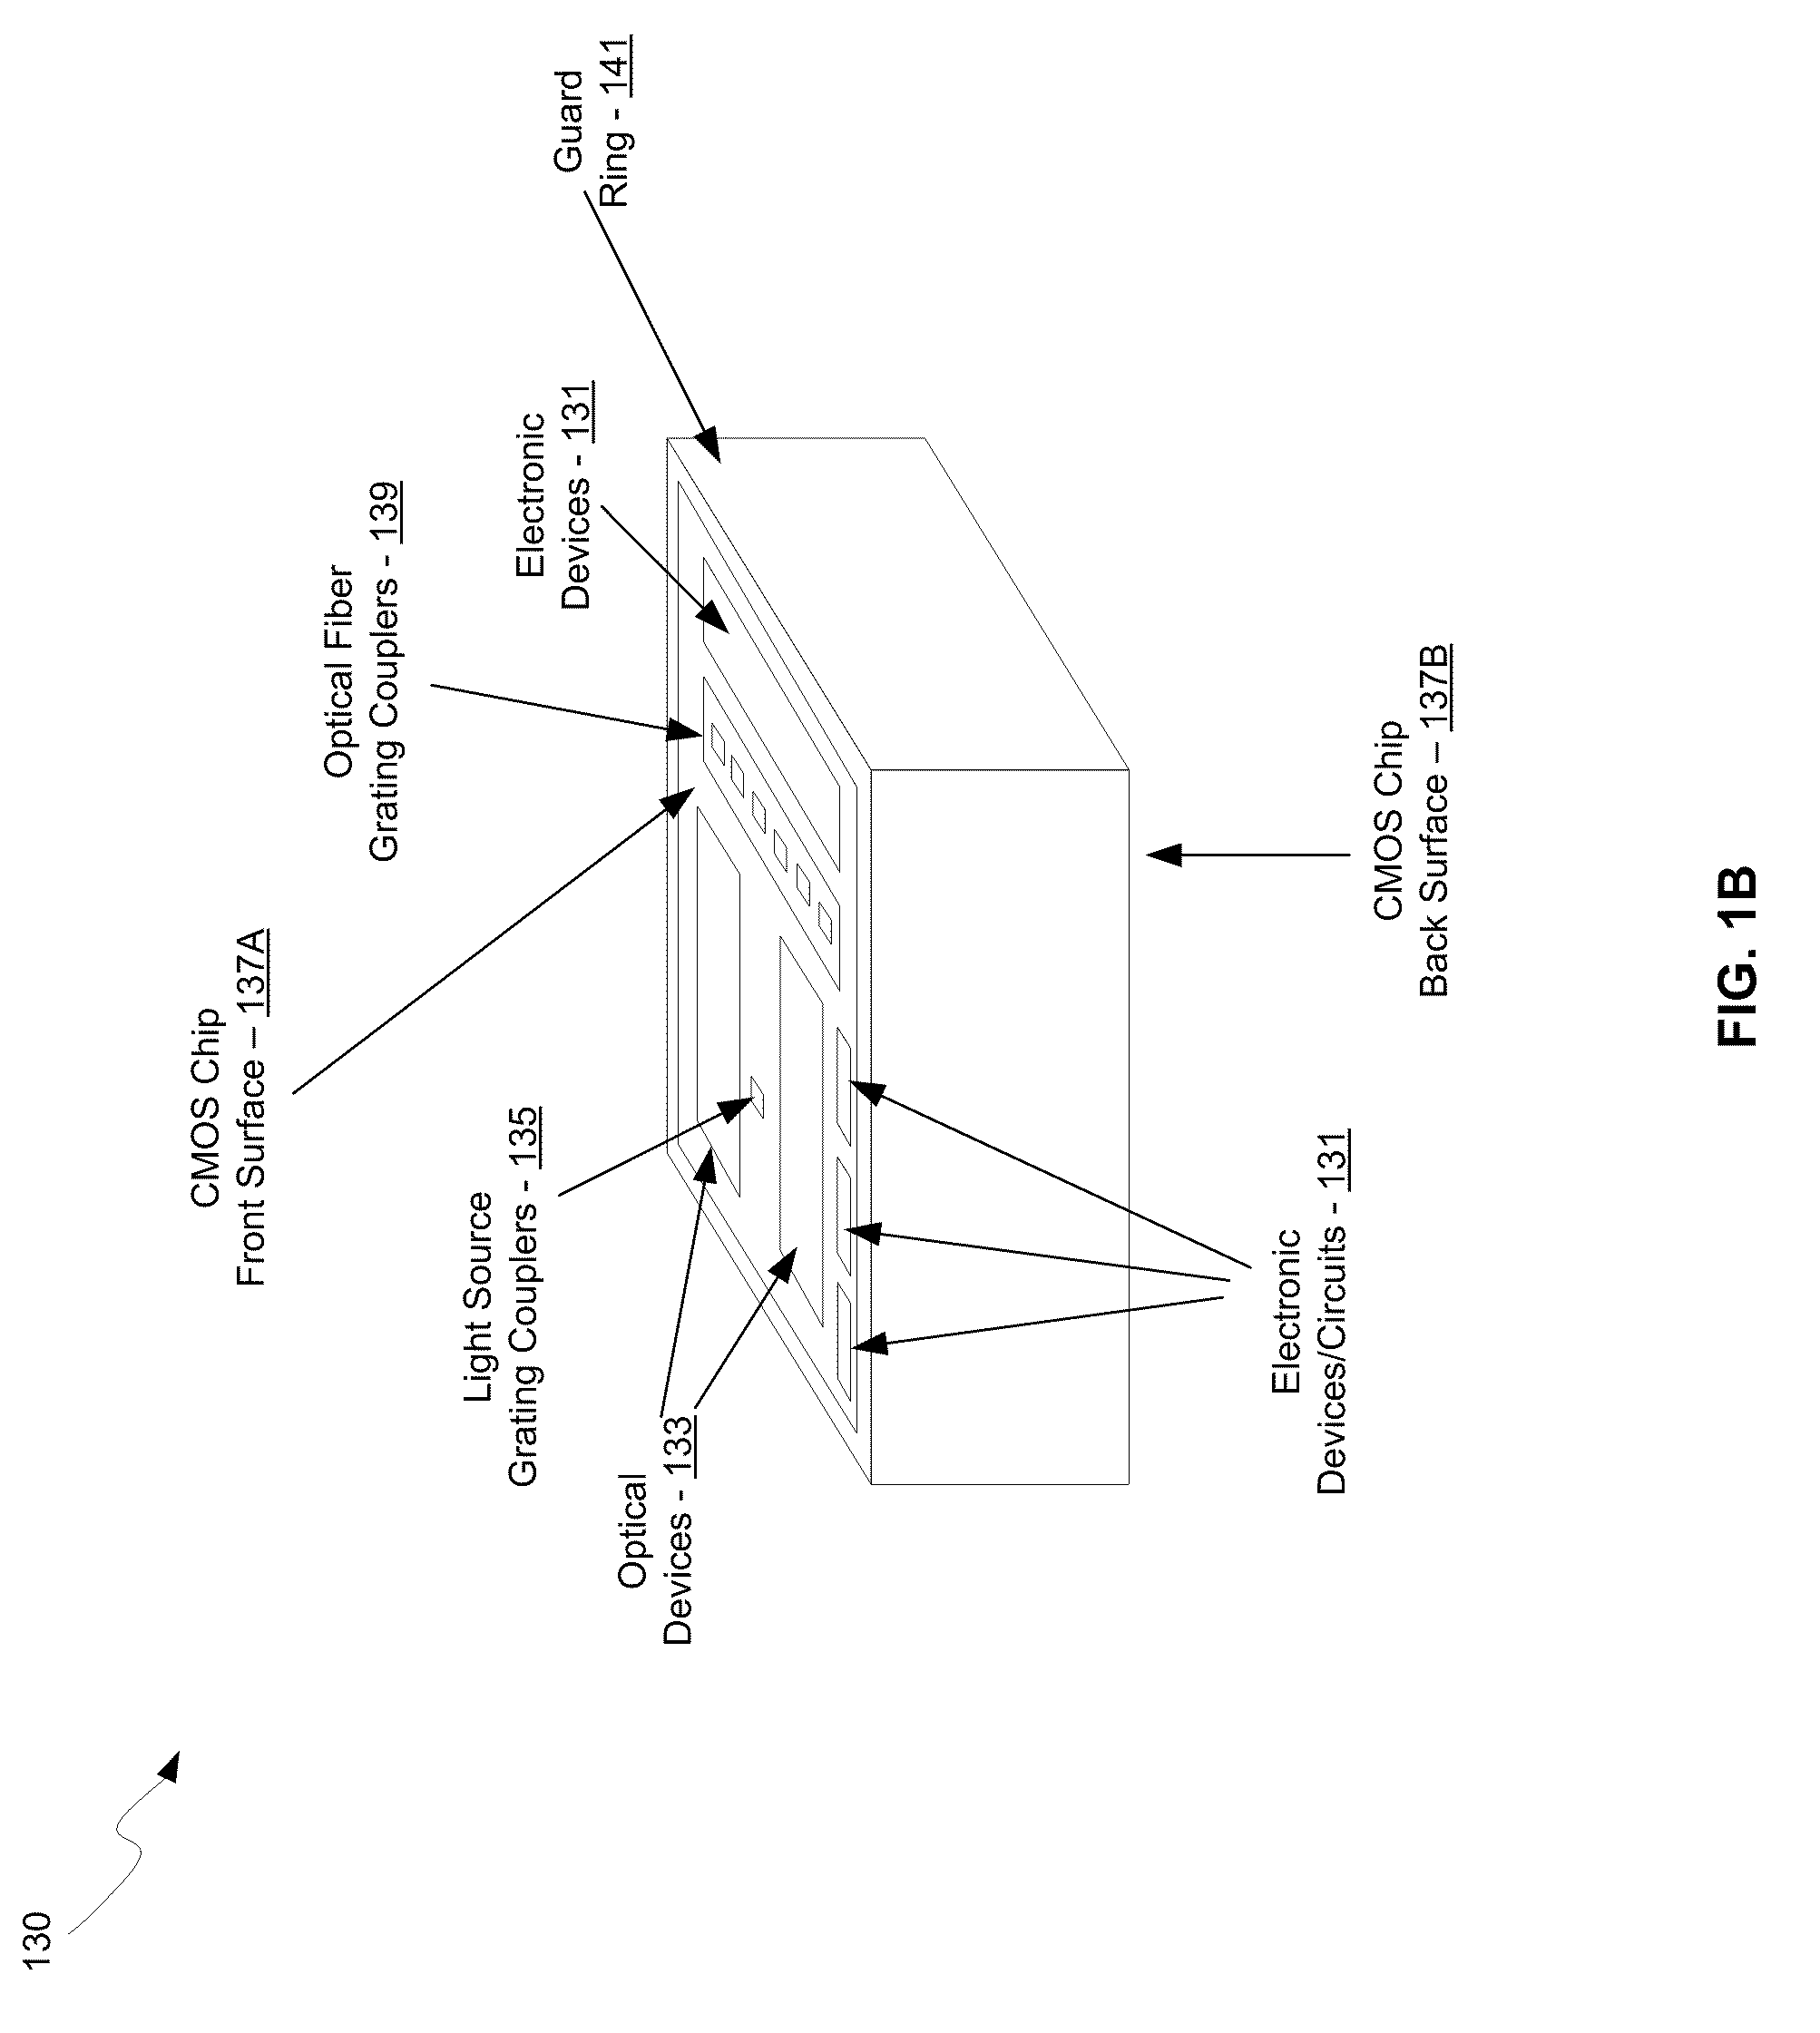 Method and system for optoelectronic receivers for uncoded data